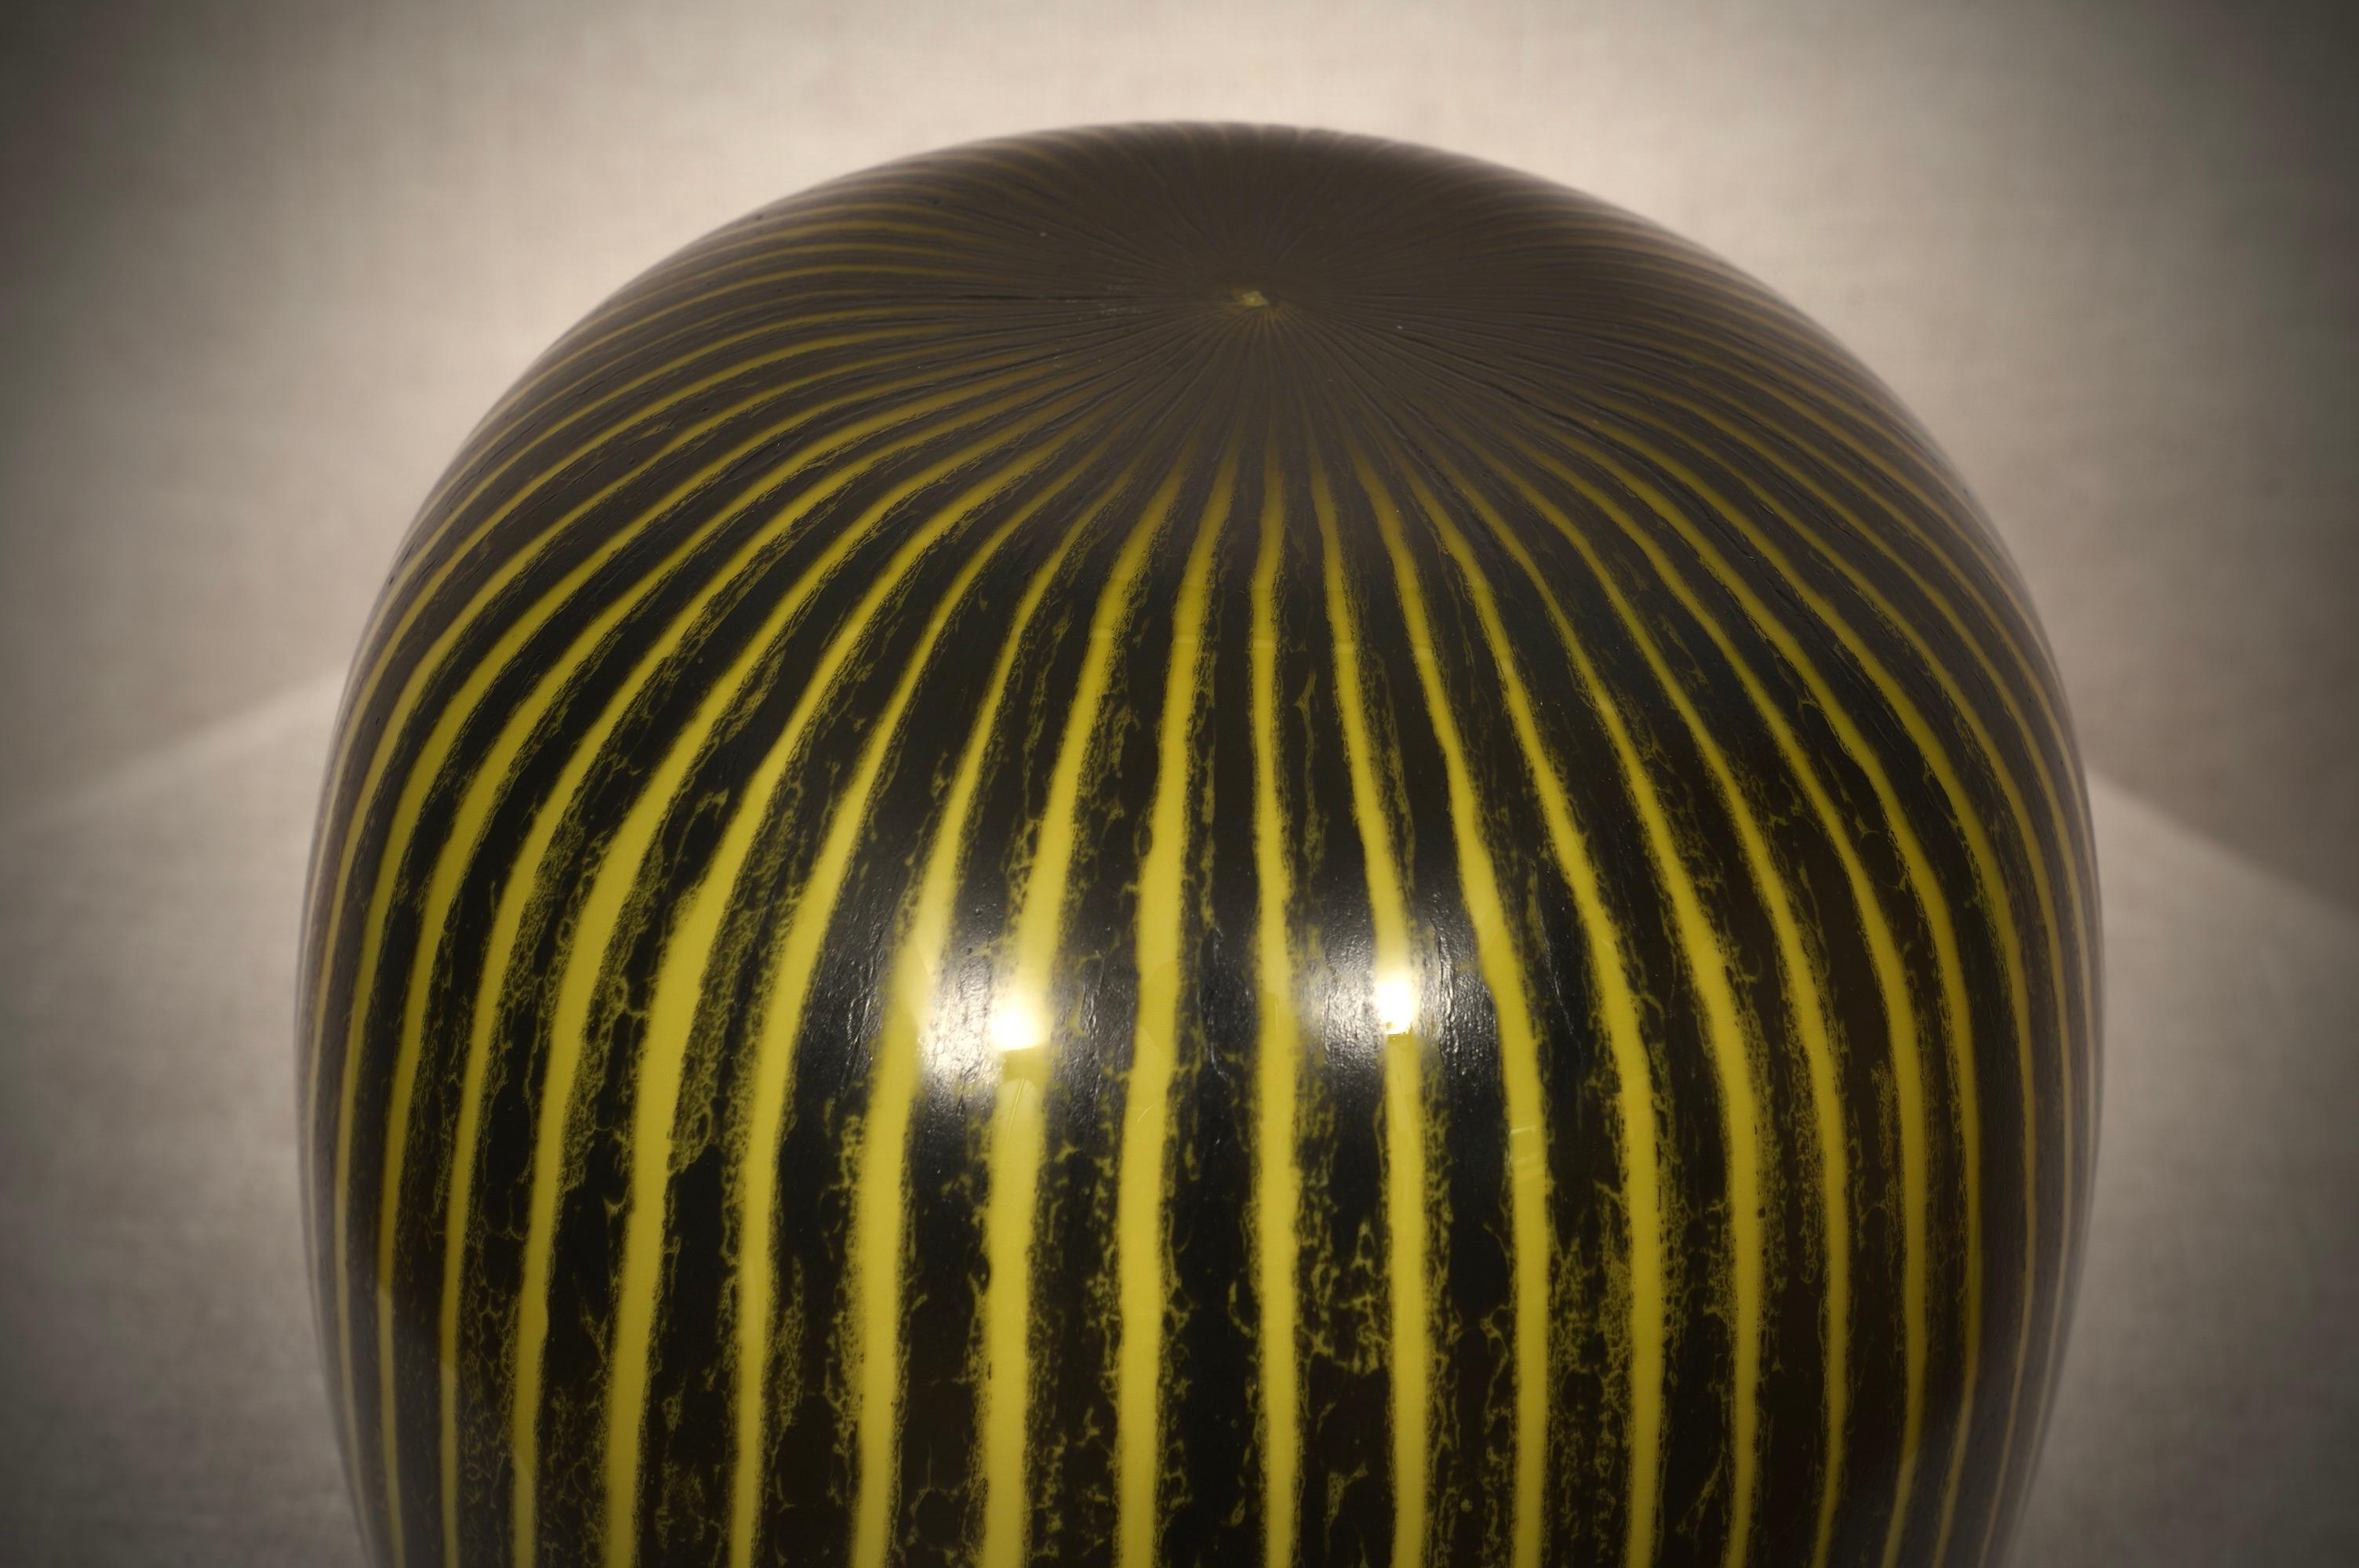 Murano Black and Yellow Art Glass Vase, 1950 For Sale 1